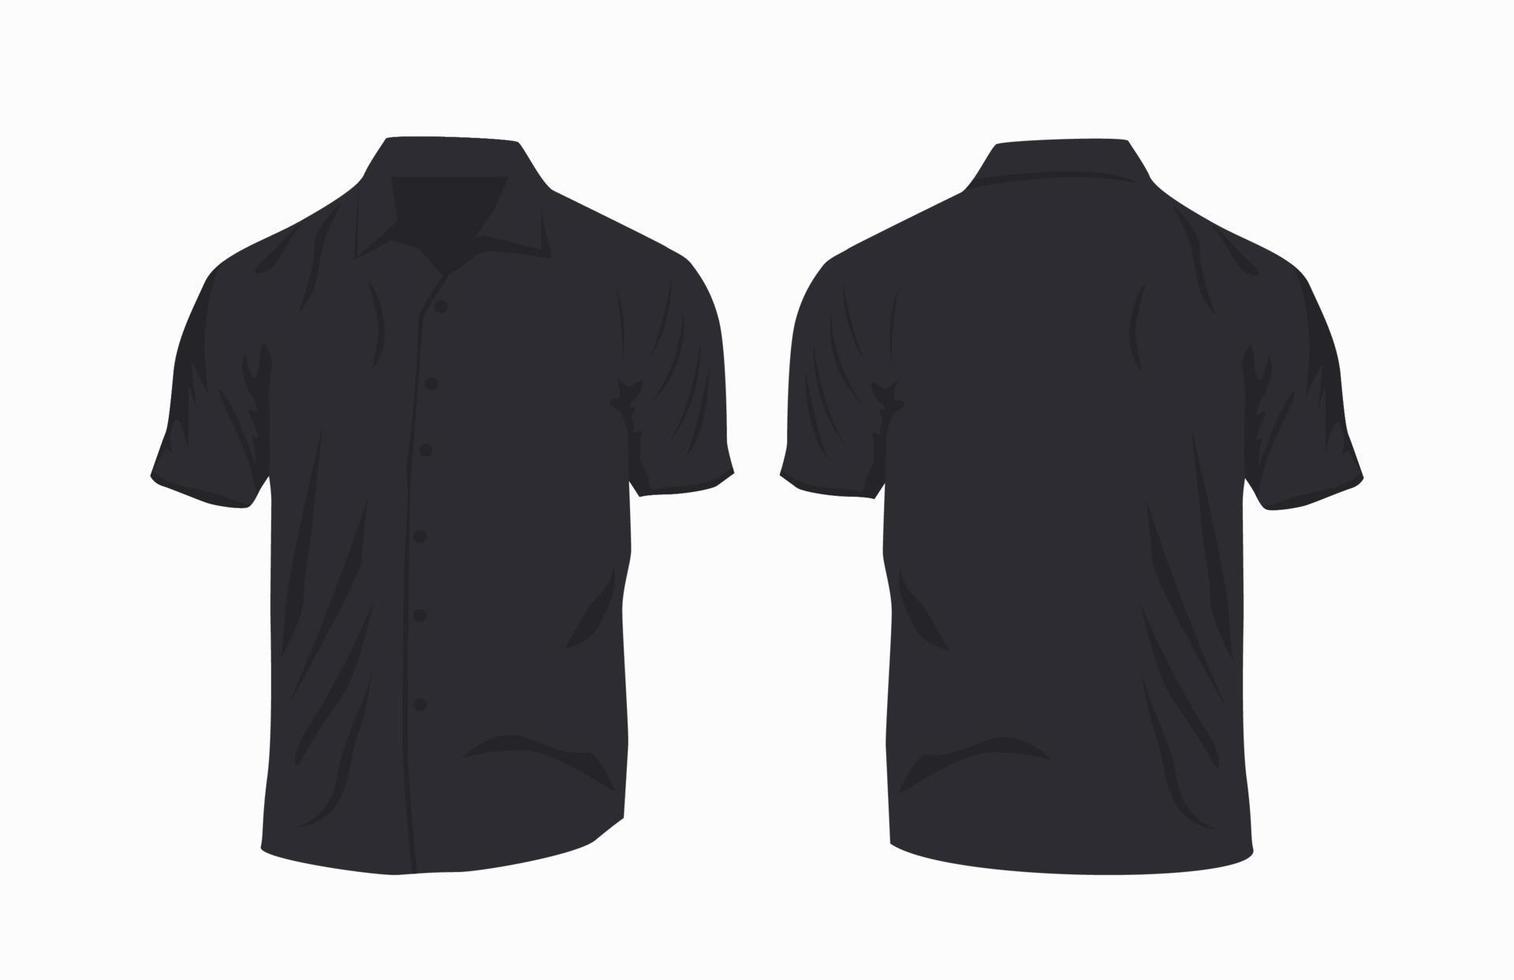 Shirt Template Realistic Vect... vector